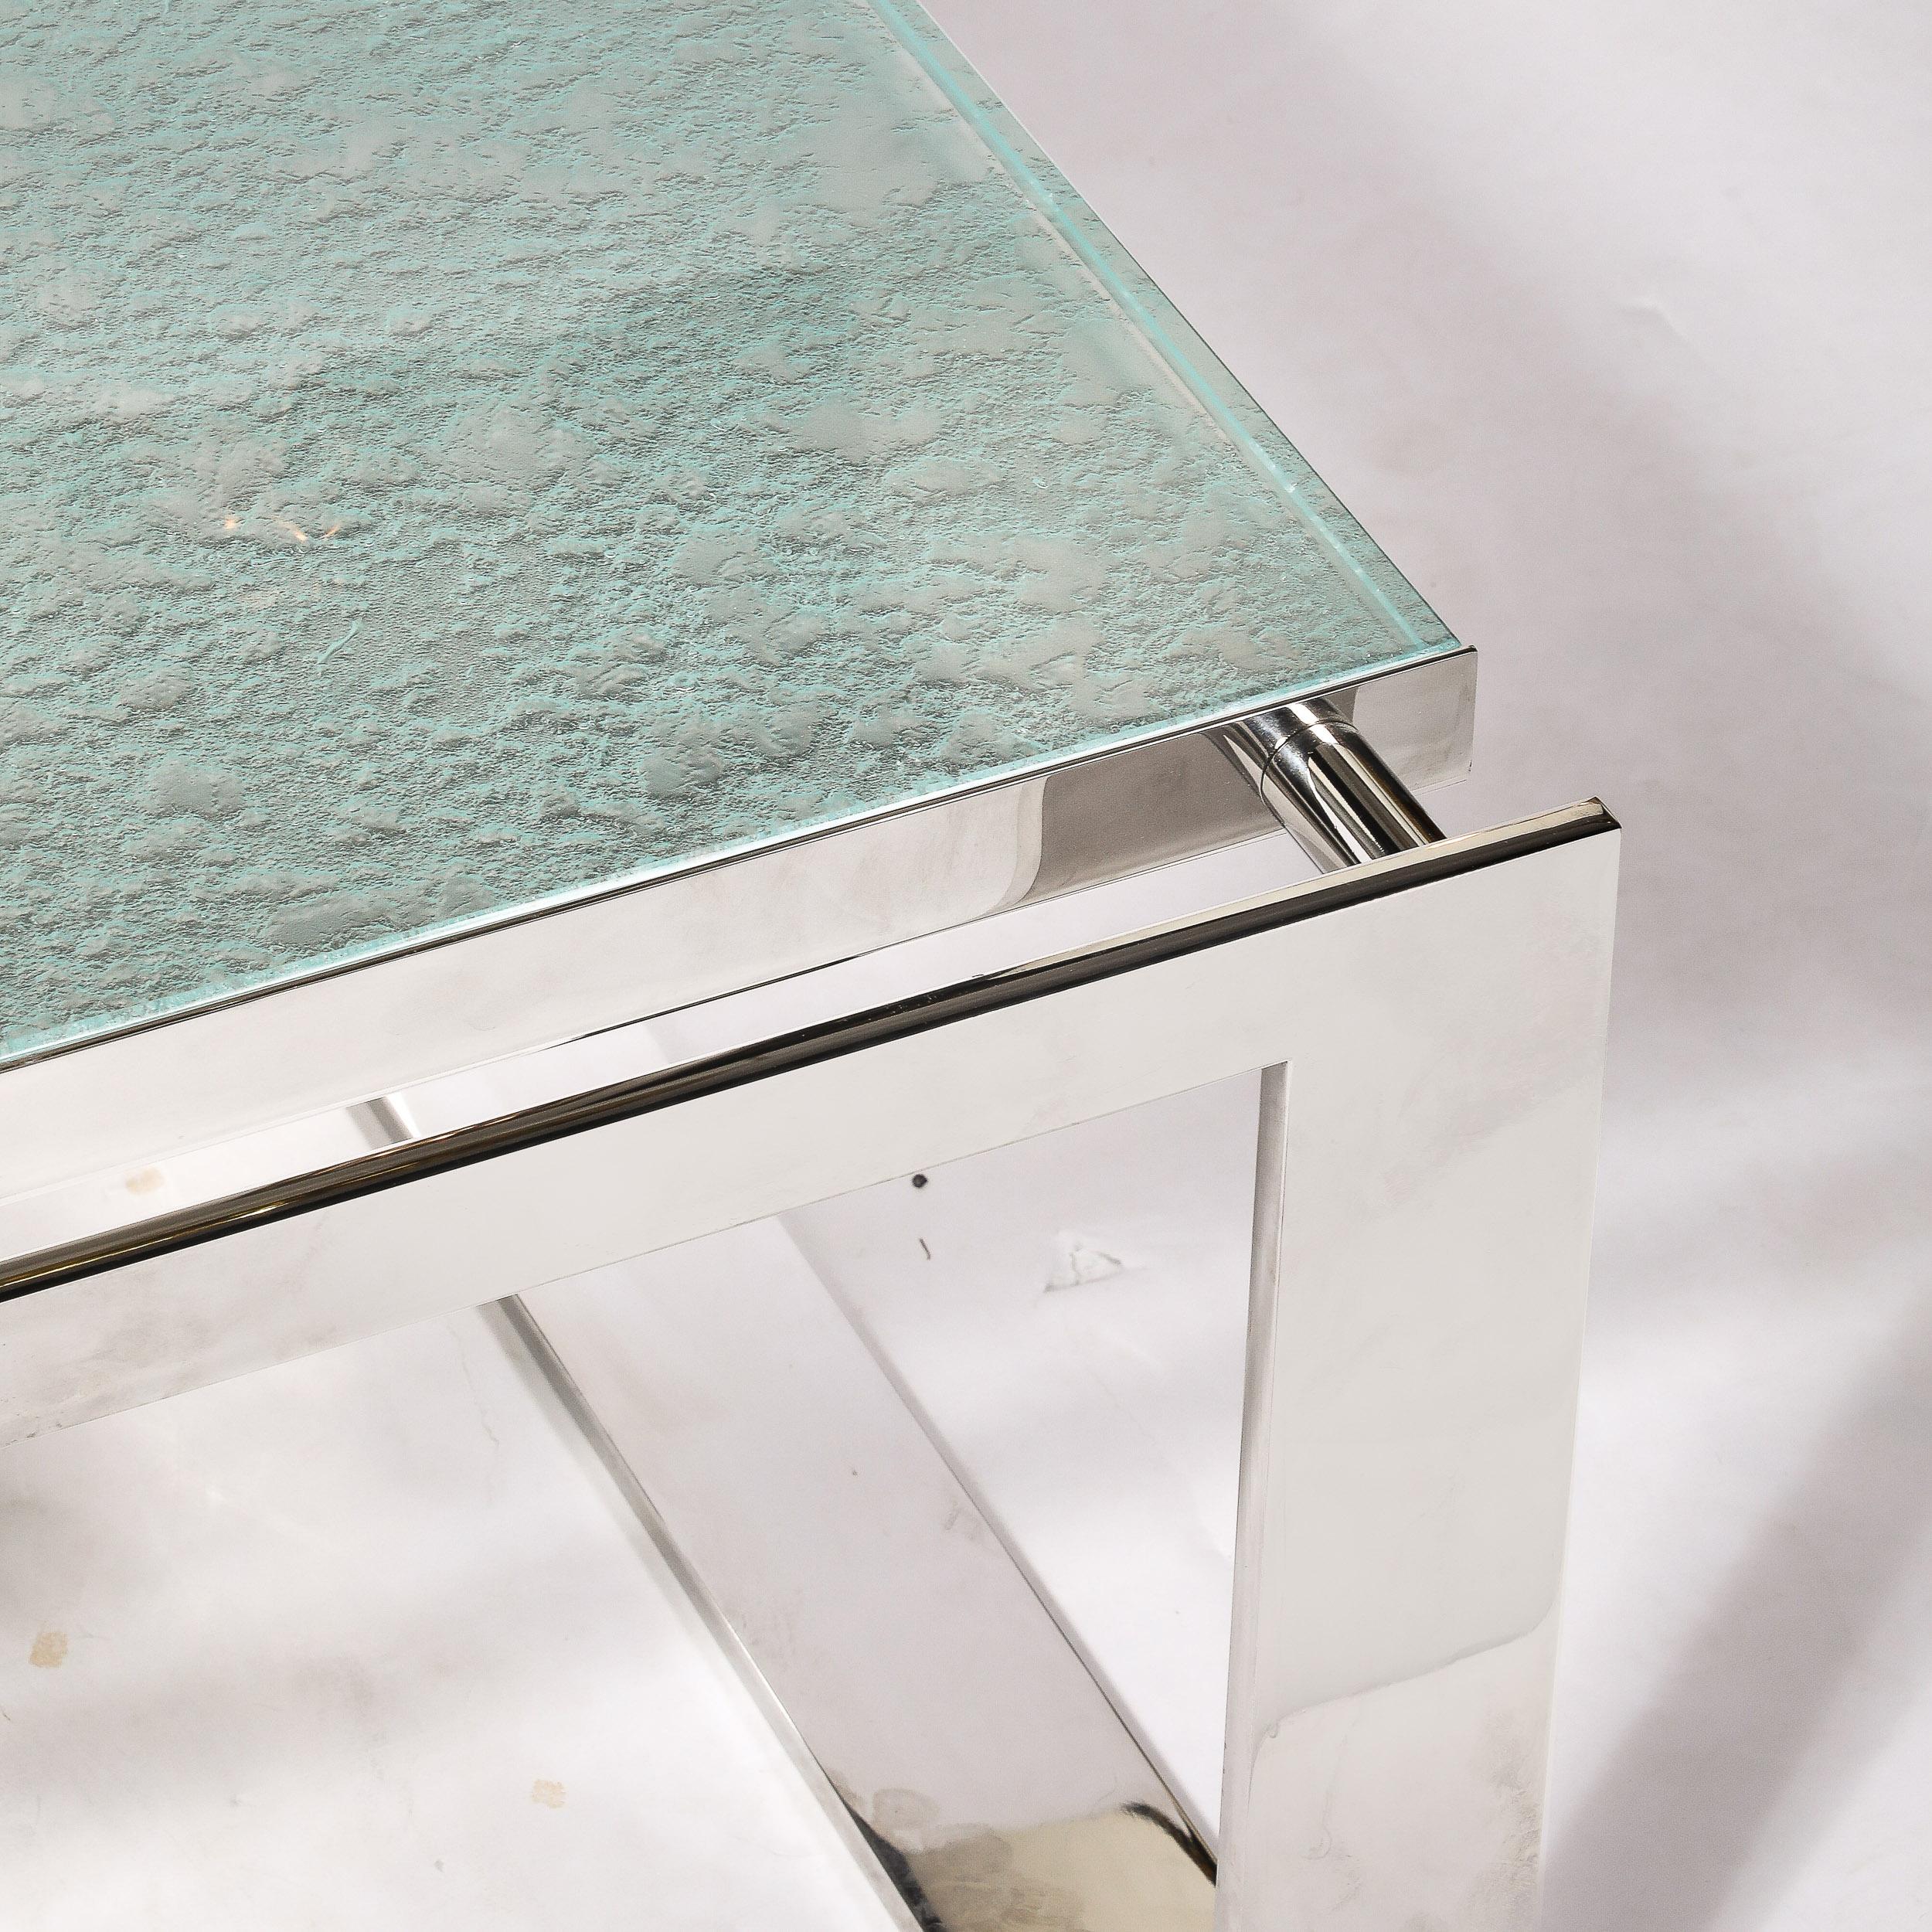 20th Century Modernist Nickel  and Lucite Glacial Cocktail Table by Lorin Marsh For Sale